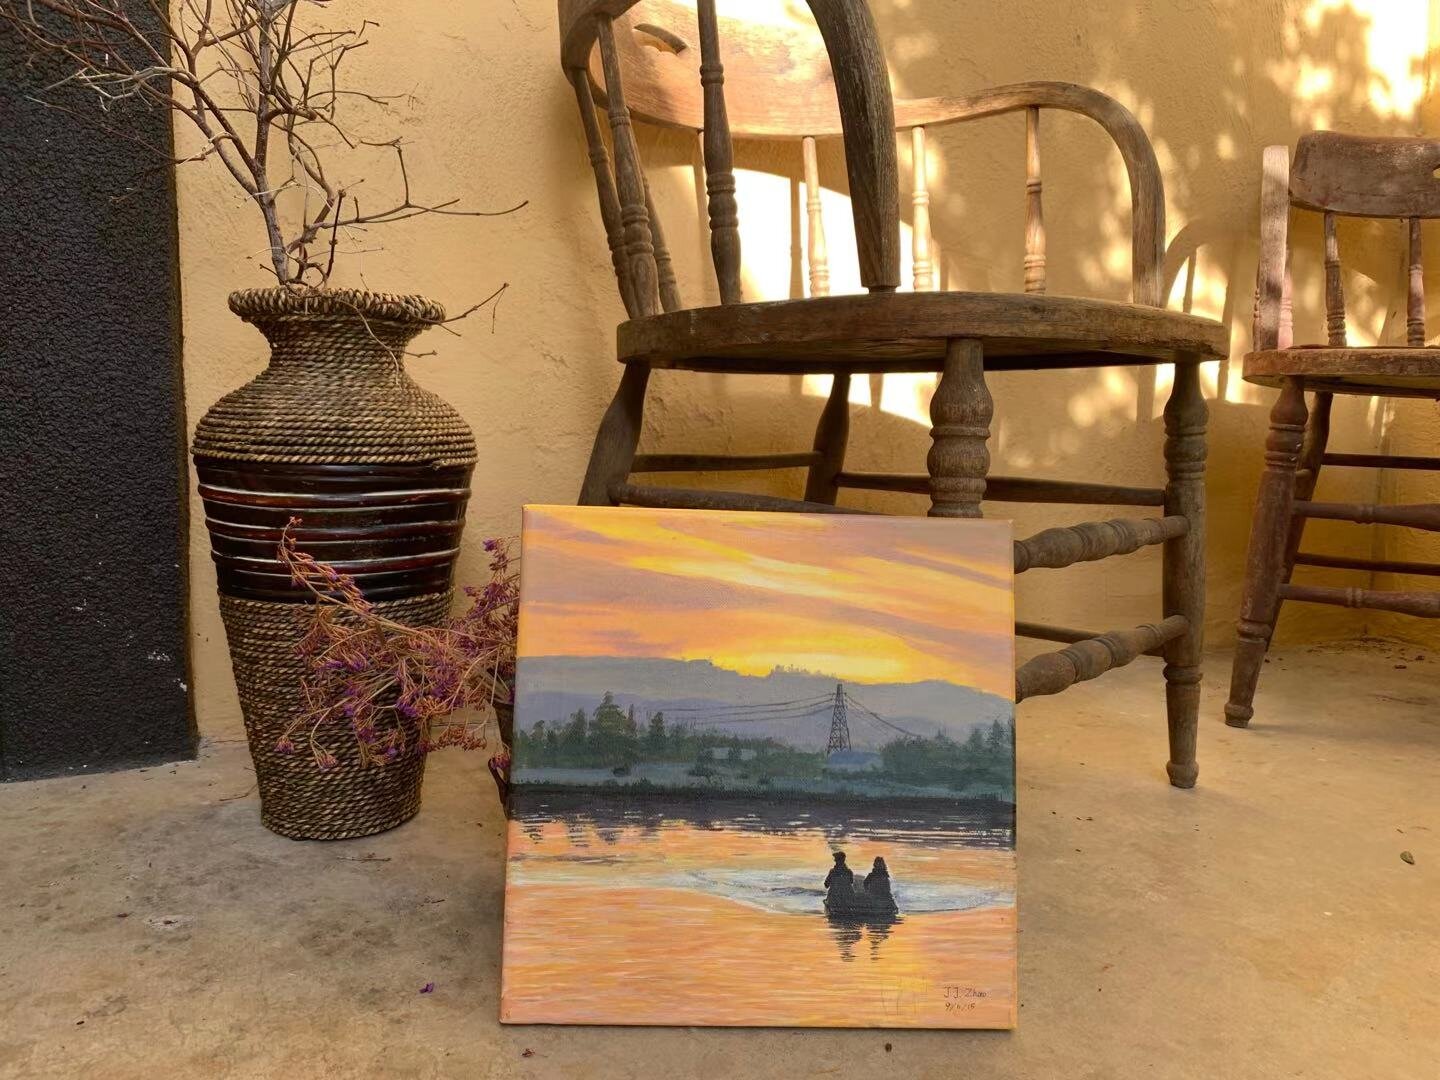 SUNSET ON THE RIVER - ACRYLIC PAINTING - ARTIST: J. ZHAO